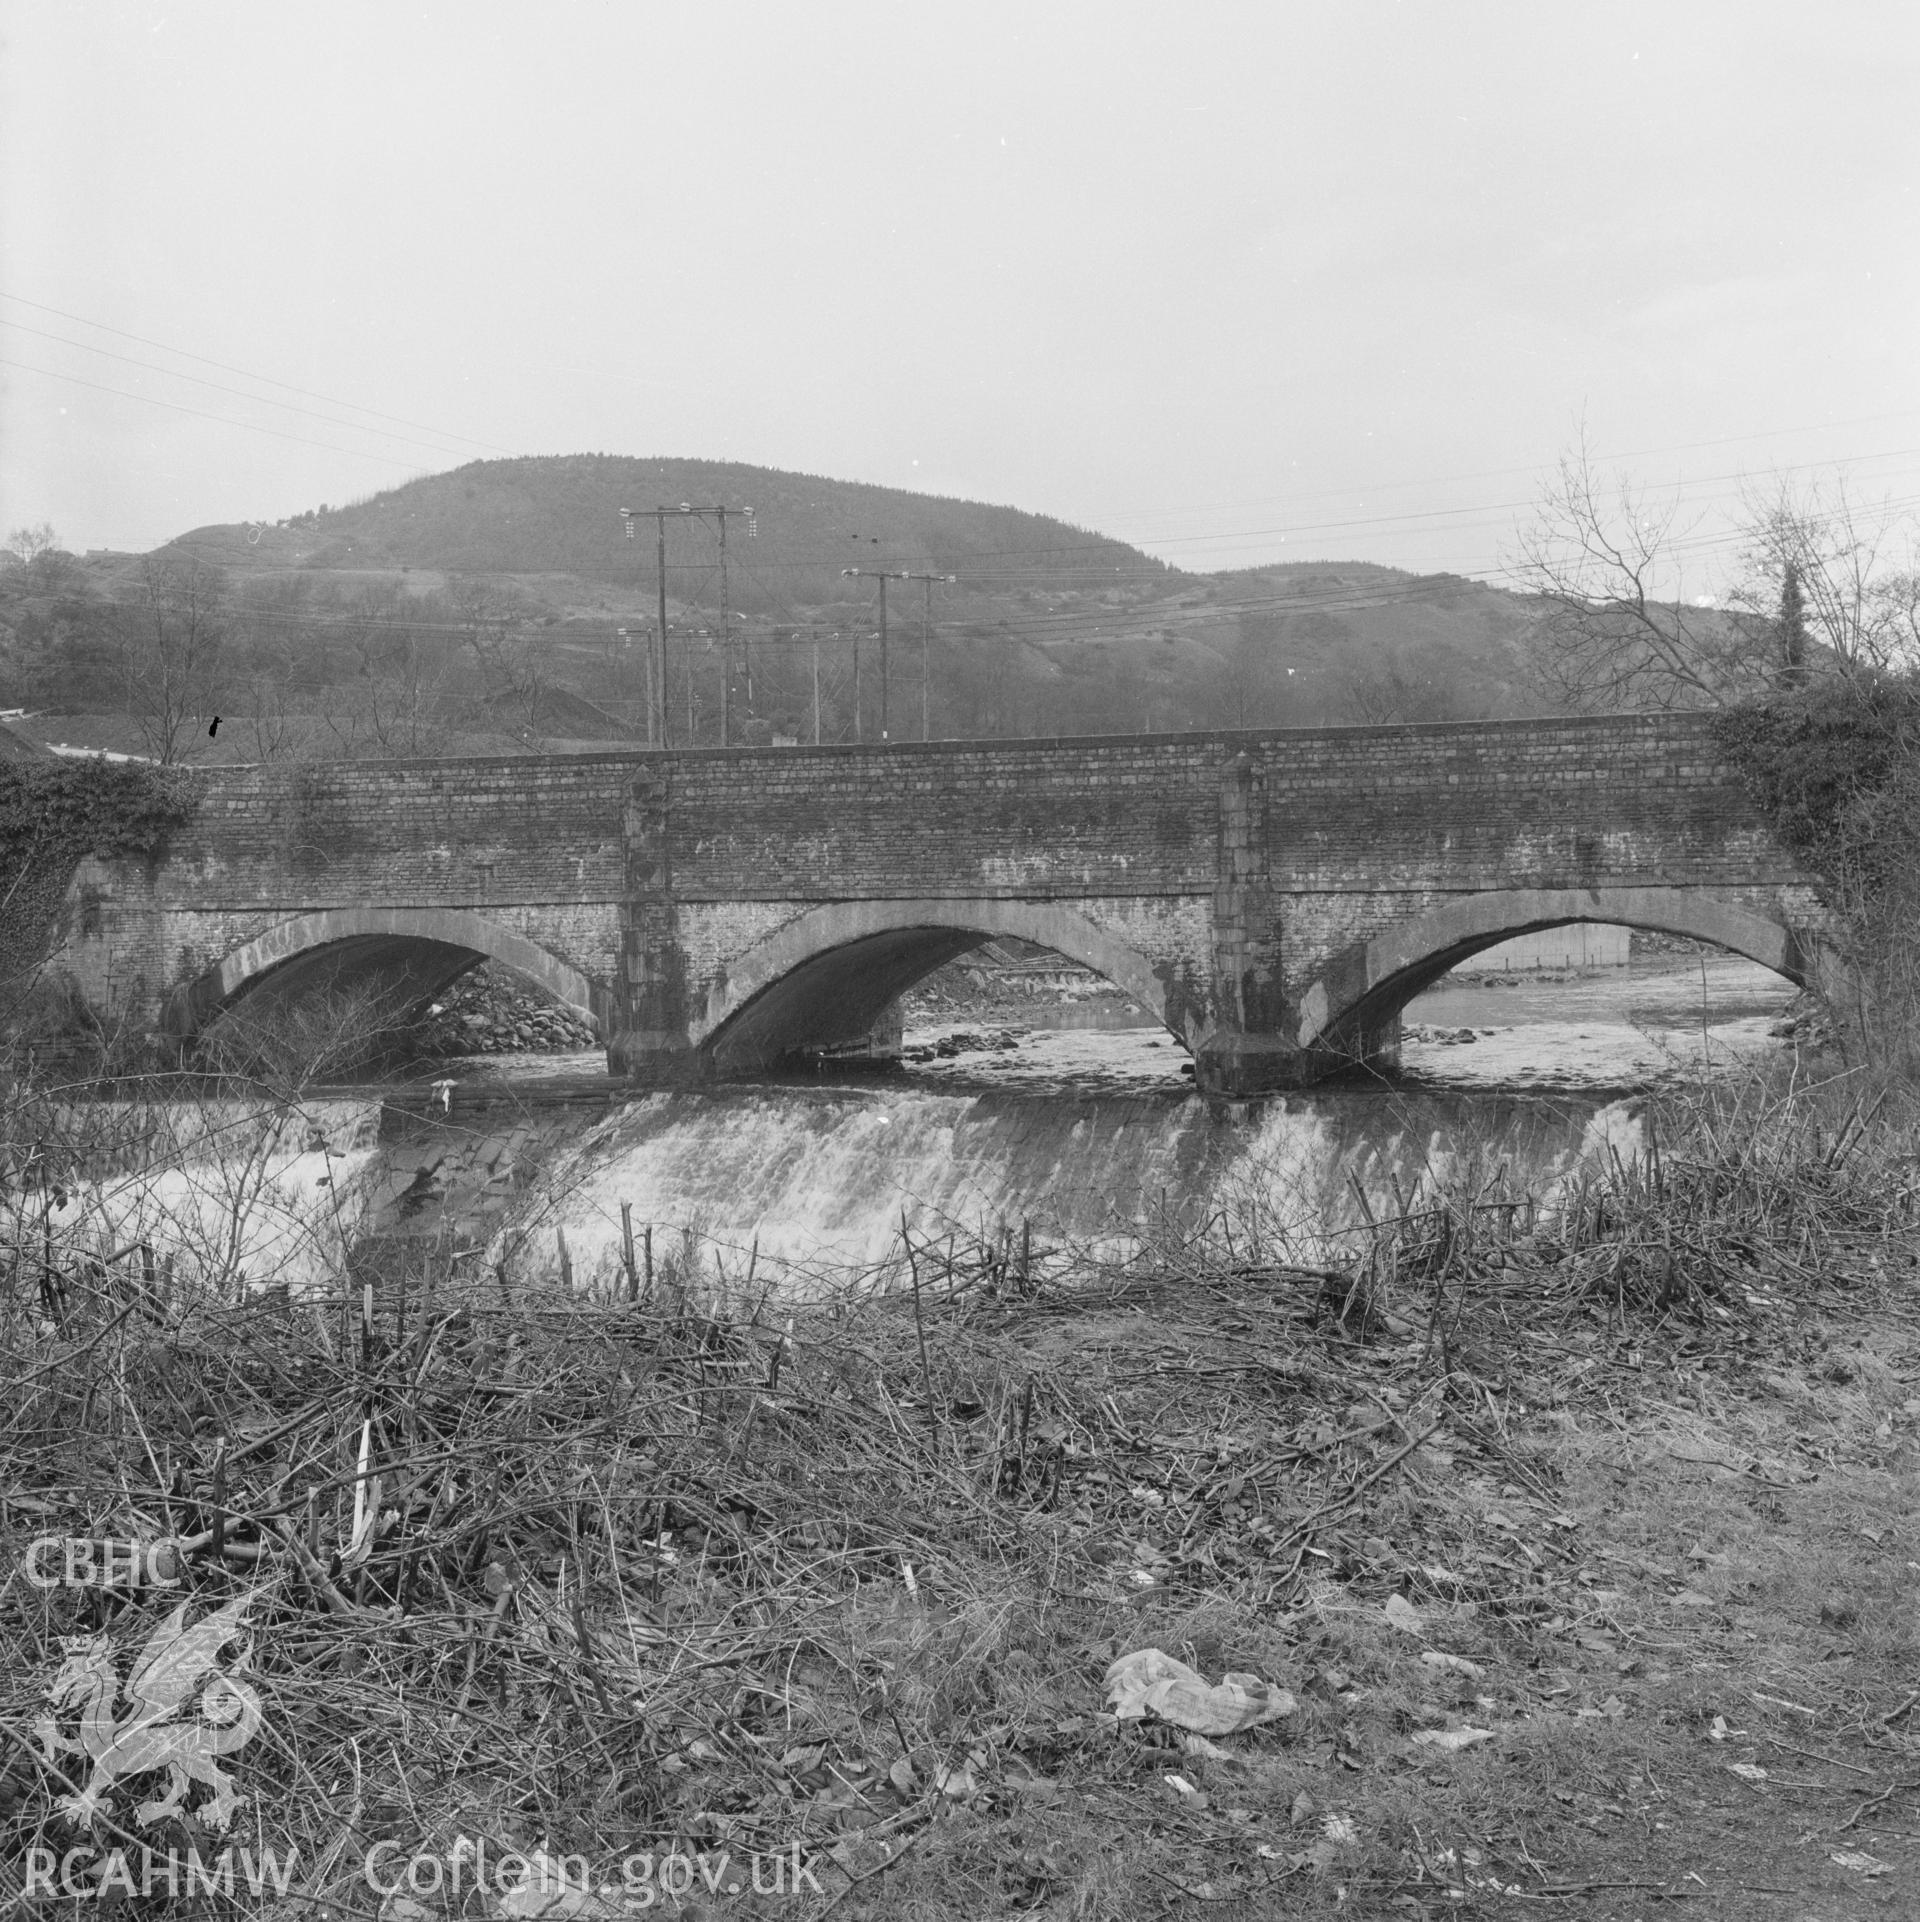 Digital copy of a black and white negative showing view of Ystalyfera Aqueduct, Swansea Canal.